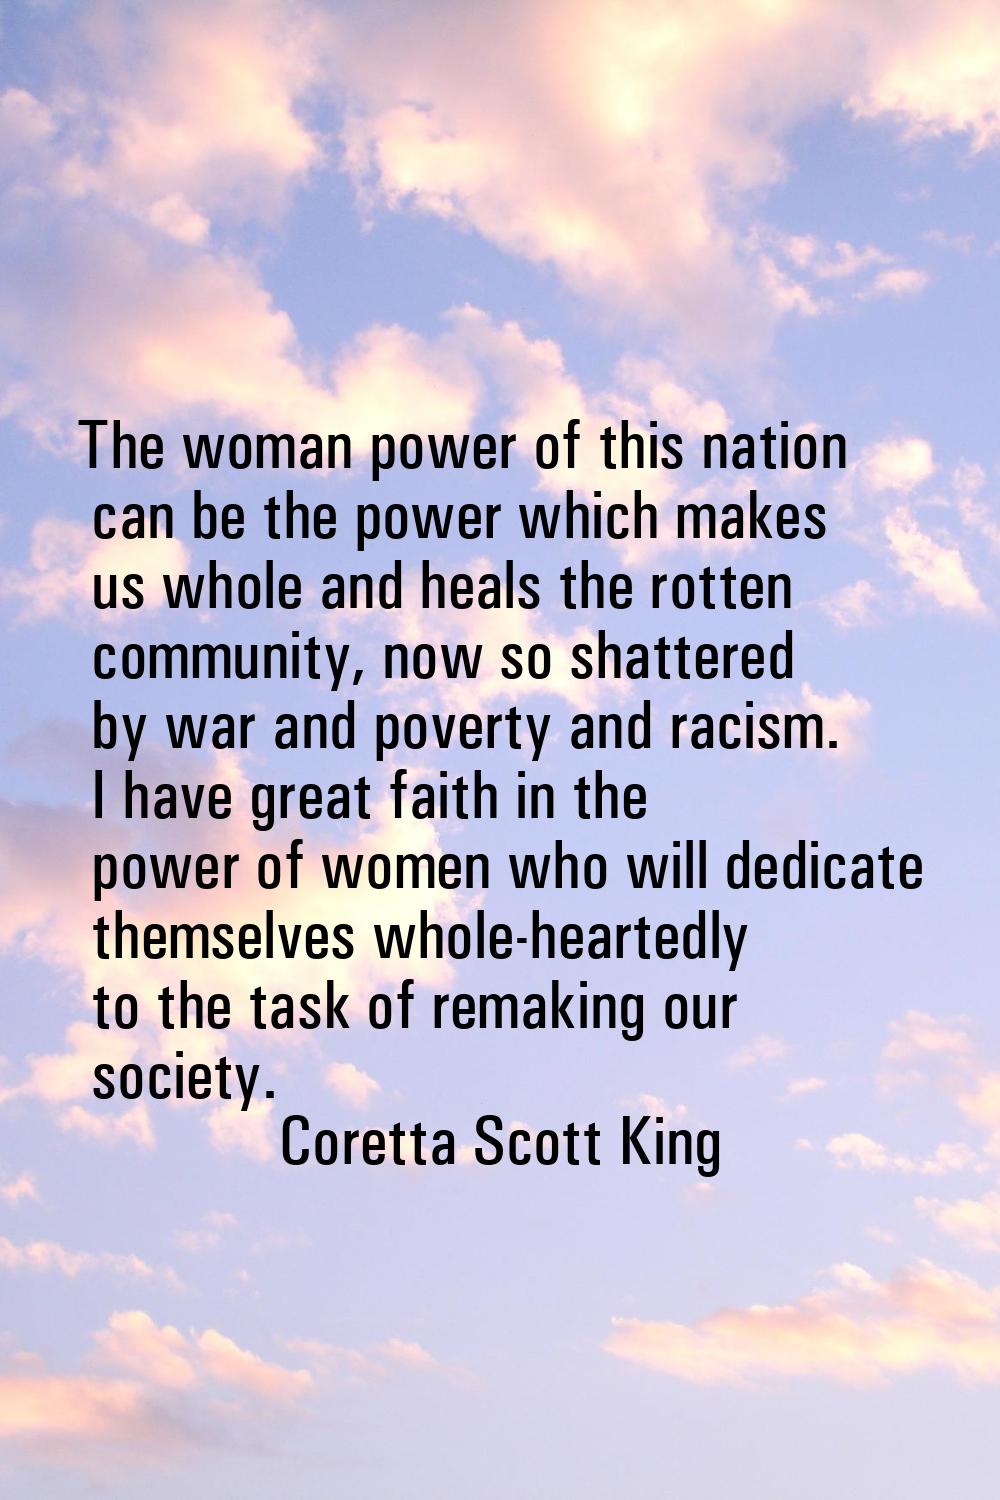 The woman power of this nation can be the power which makes us whole and heals the rotten community